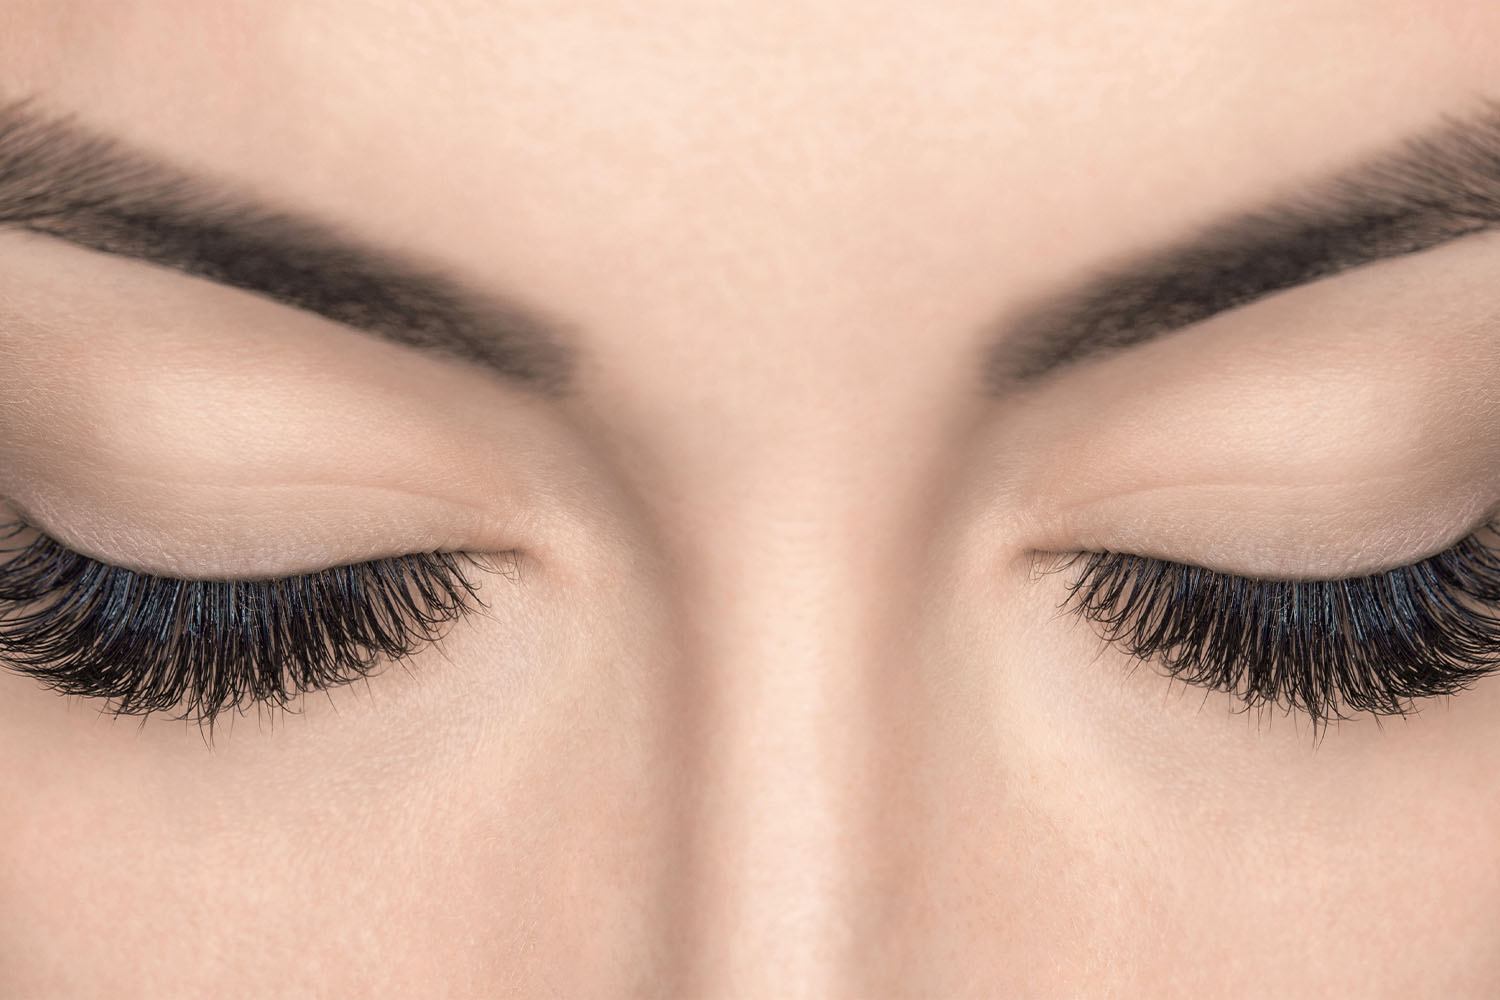 Wispy Eyelash Extensions — What You Need To Know